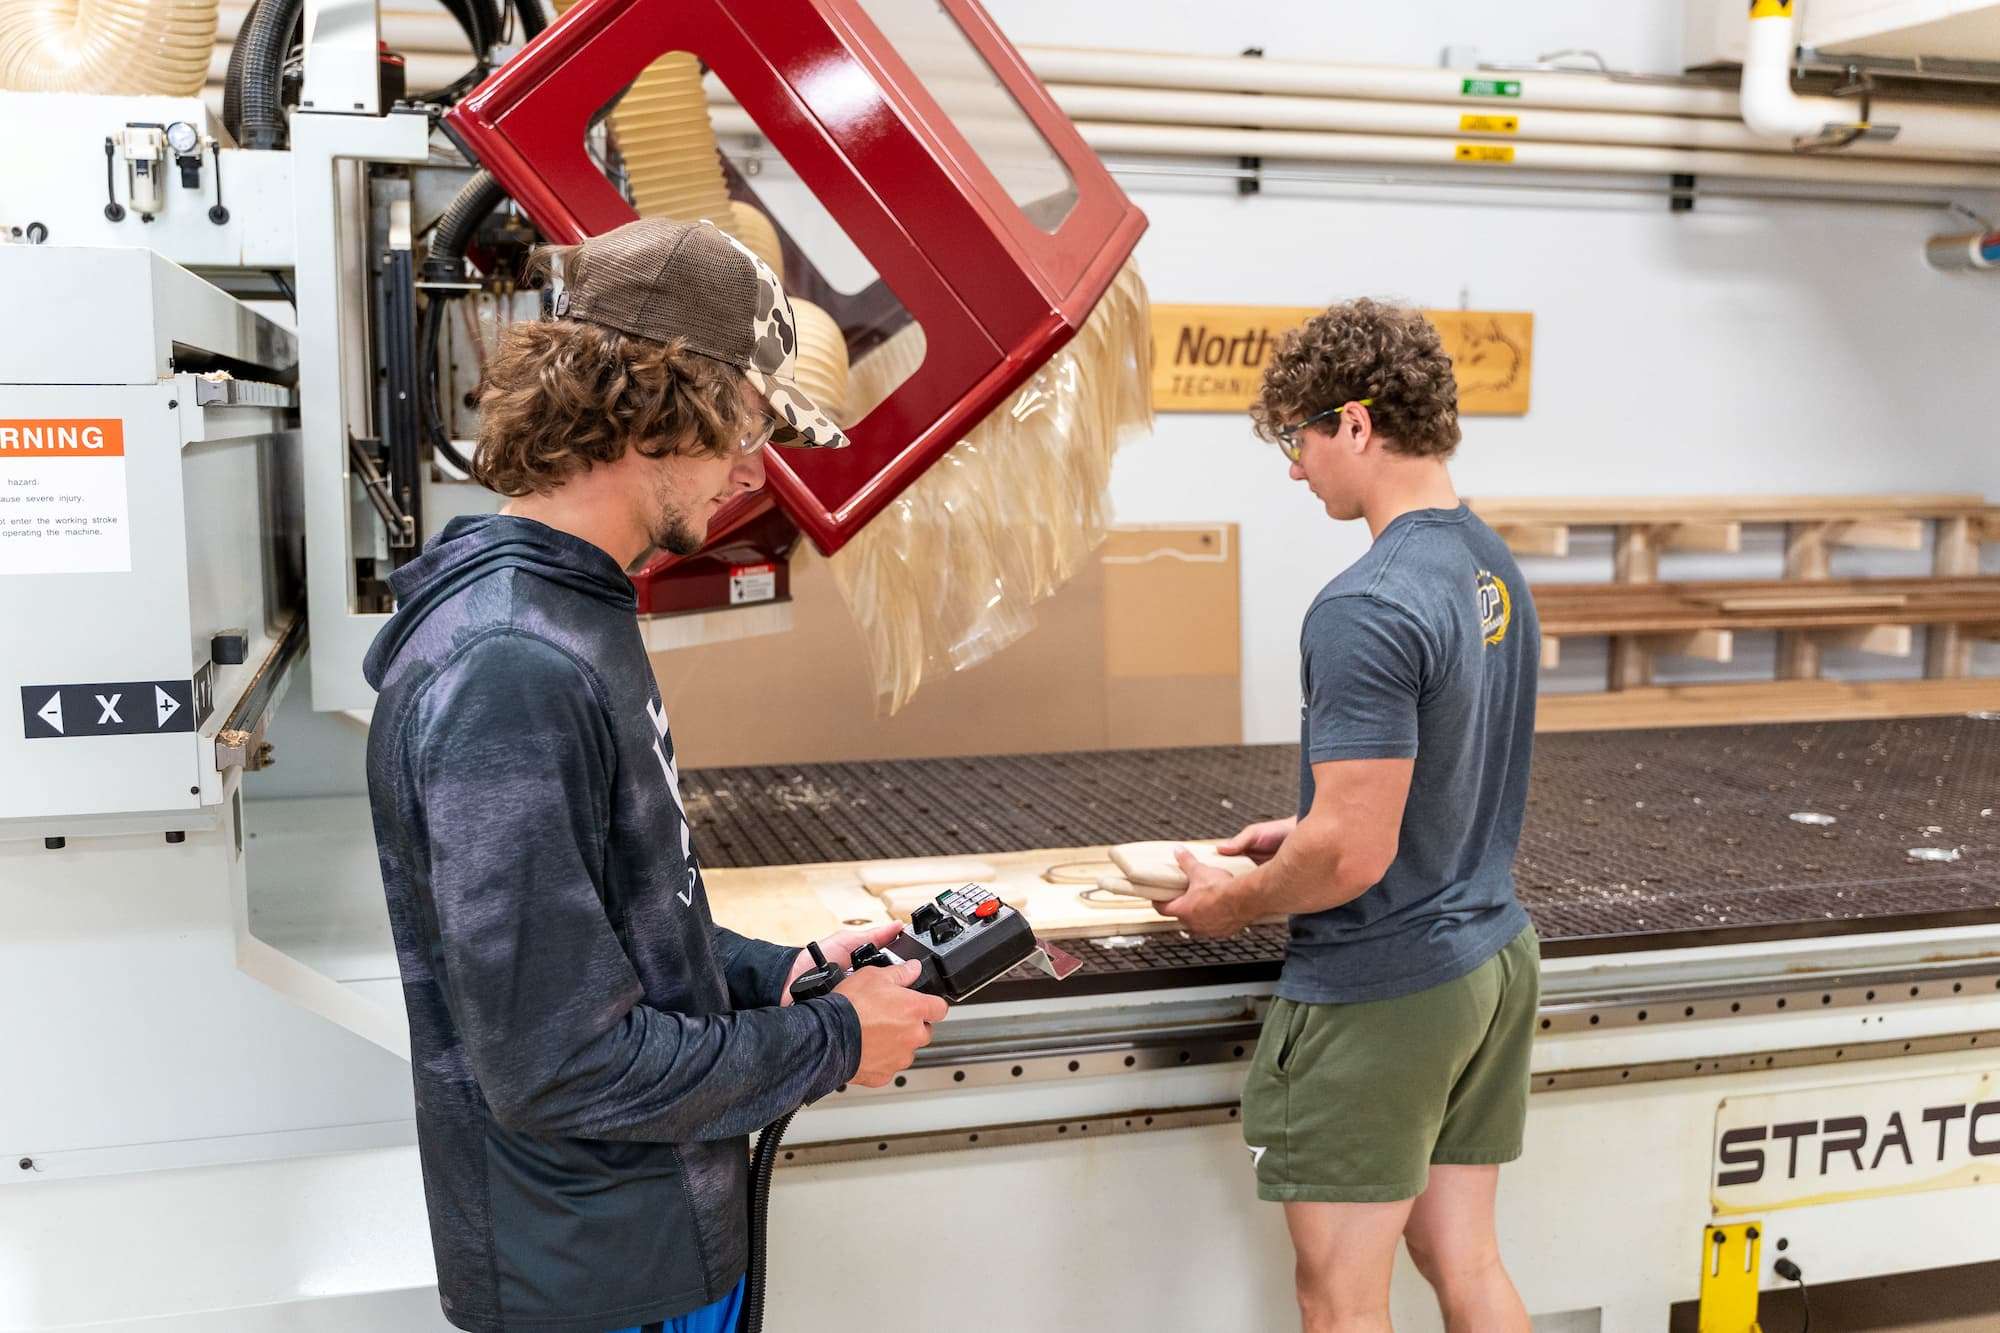 Two students examine the resulting products after running materials through a CNC router.